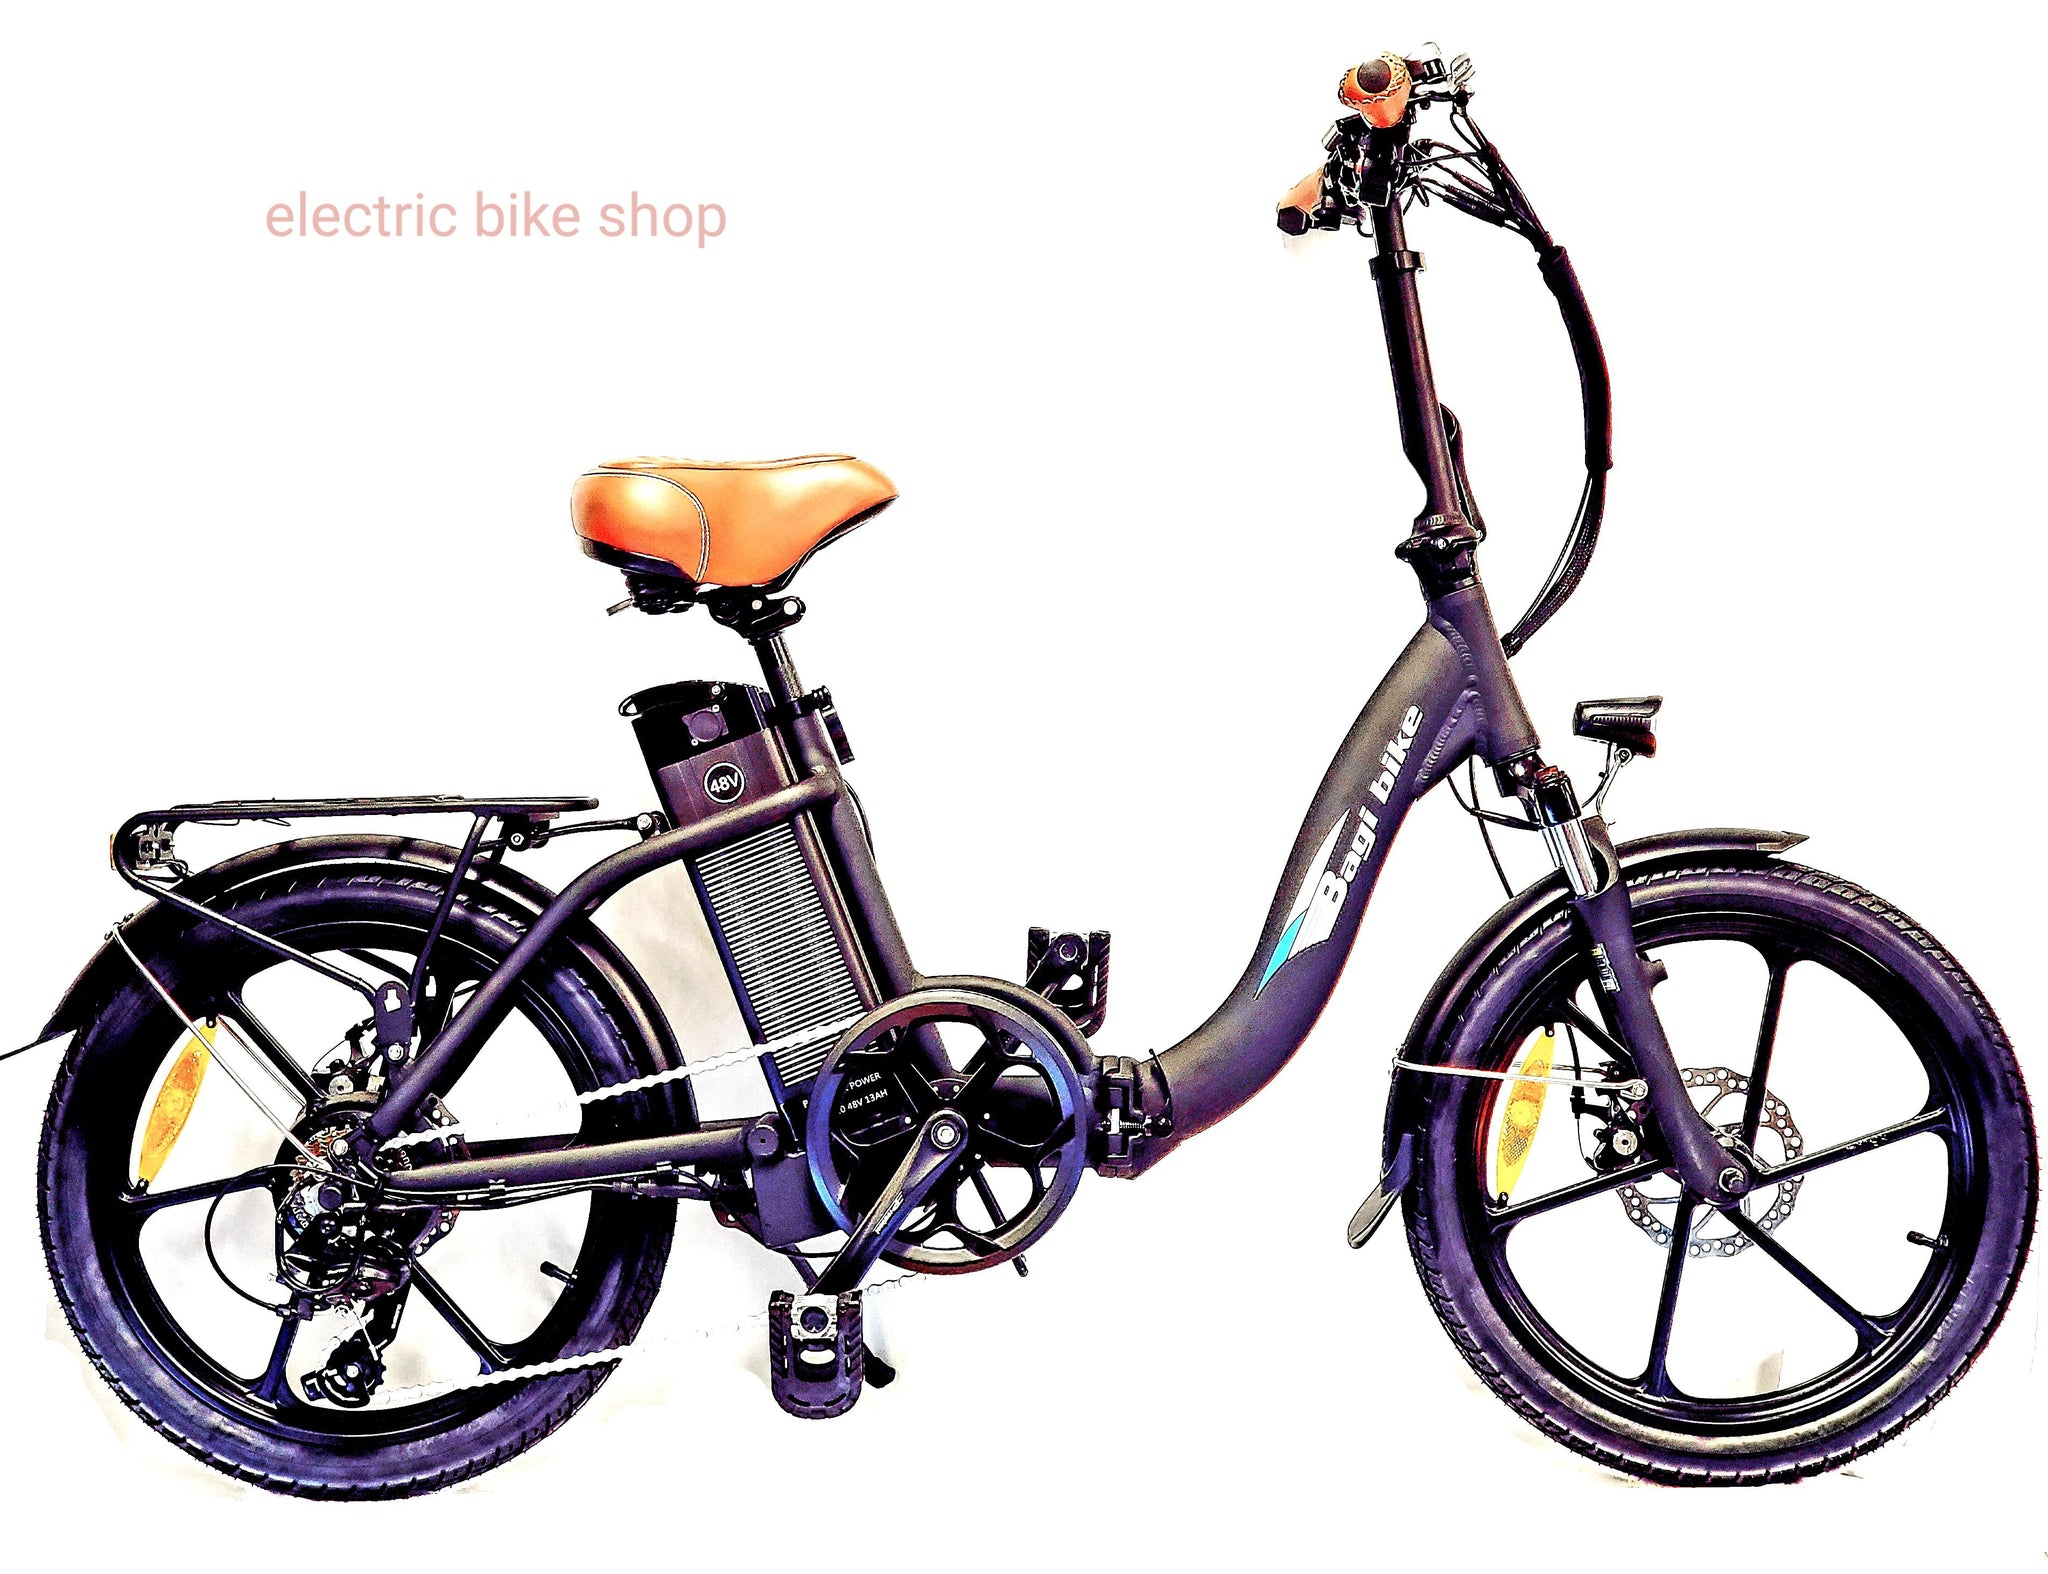 BAGIBIKE B10 STREET ST Folding Low Step Electric Bicycle